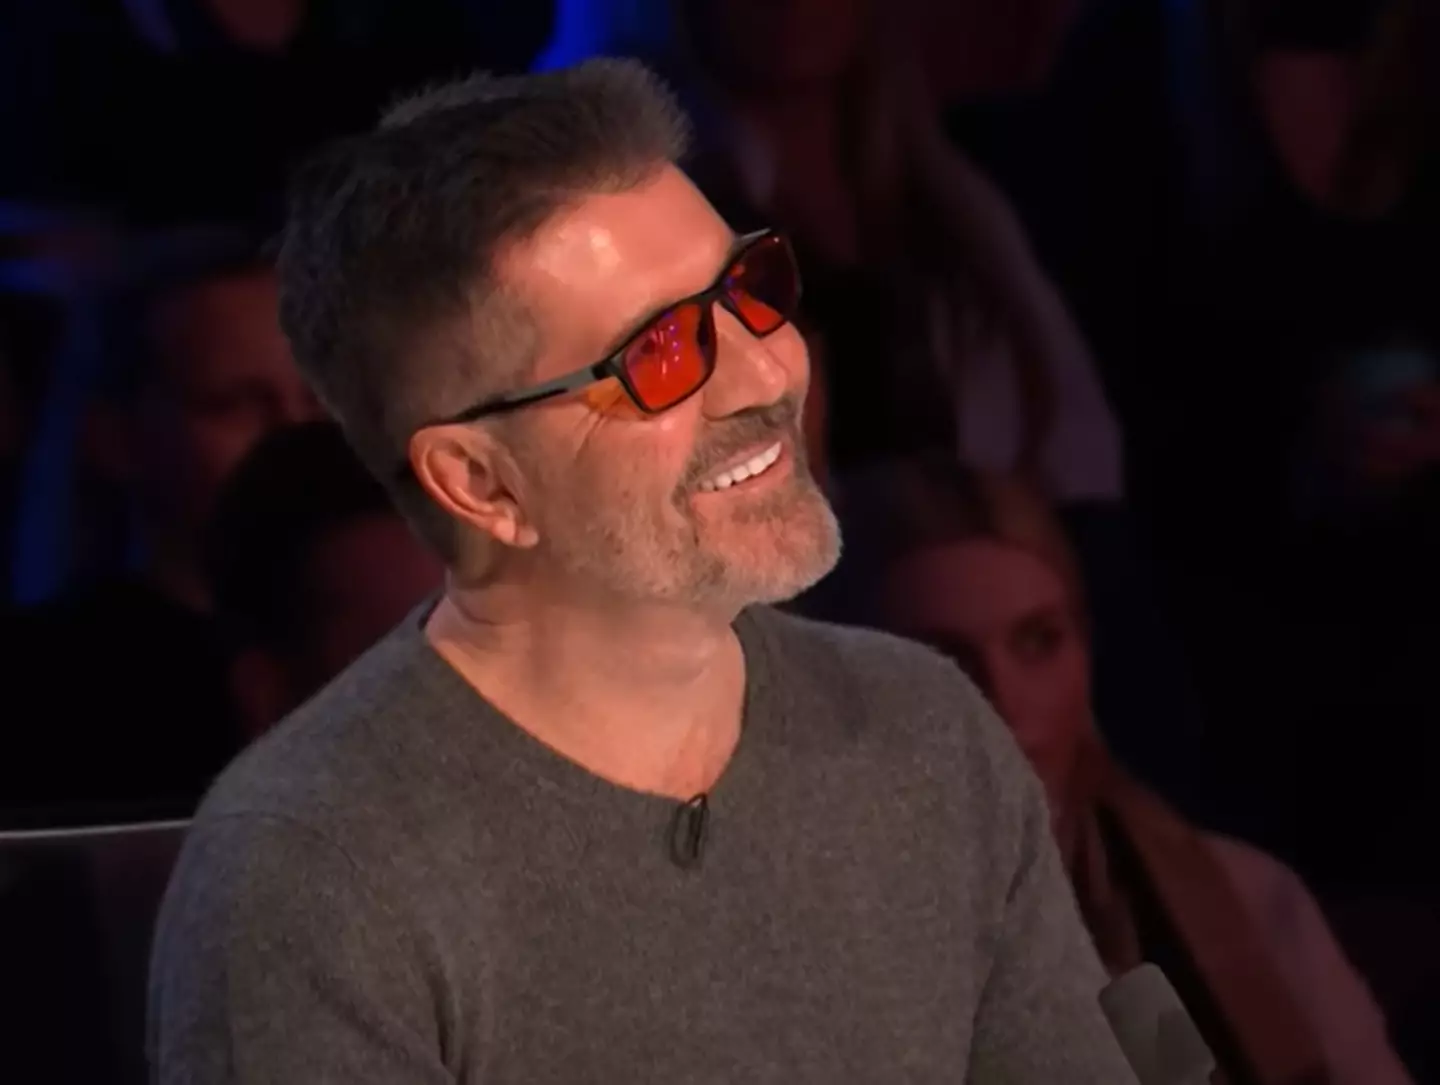 The red-tinted glasses help keep out the worst of the bright lights and can spare Simon from migraines. (ITV)